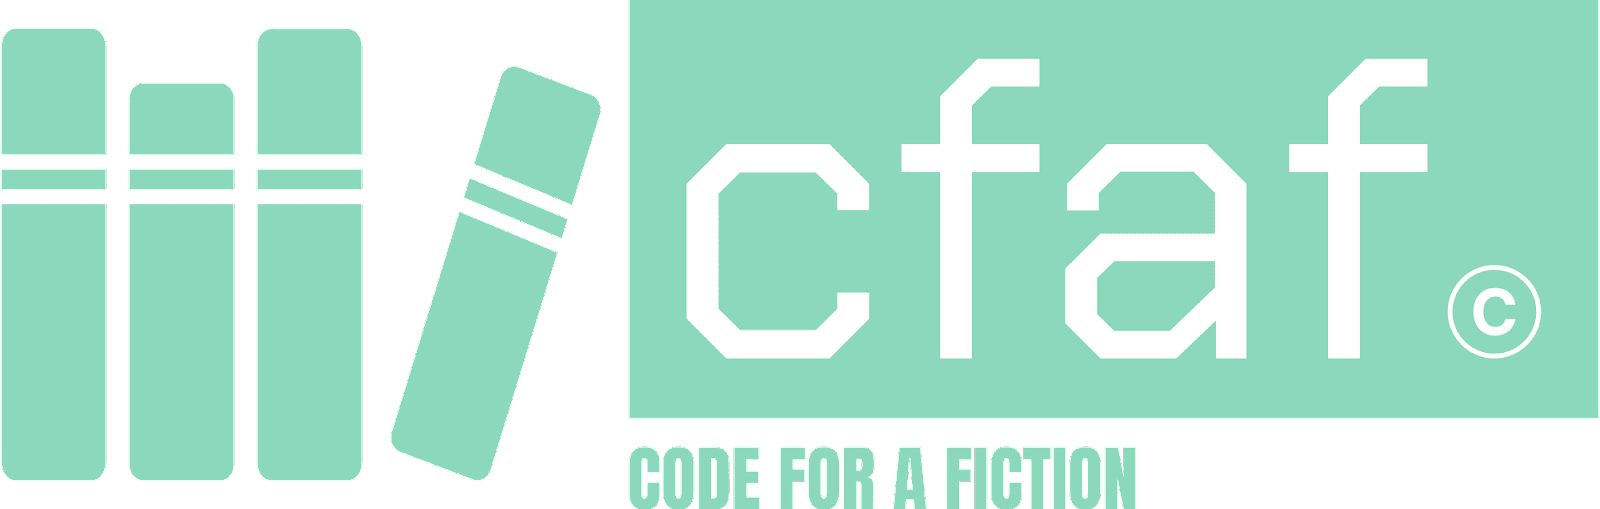 Code for a fiction